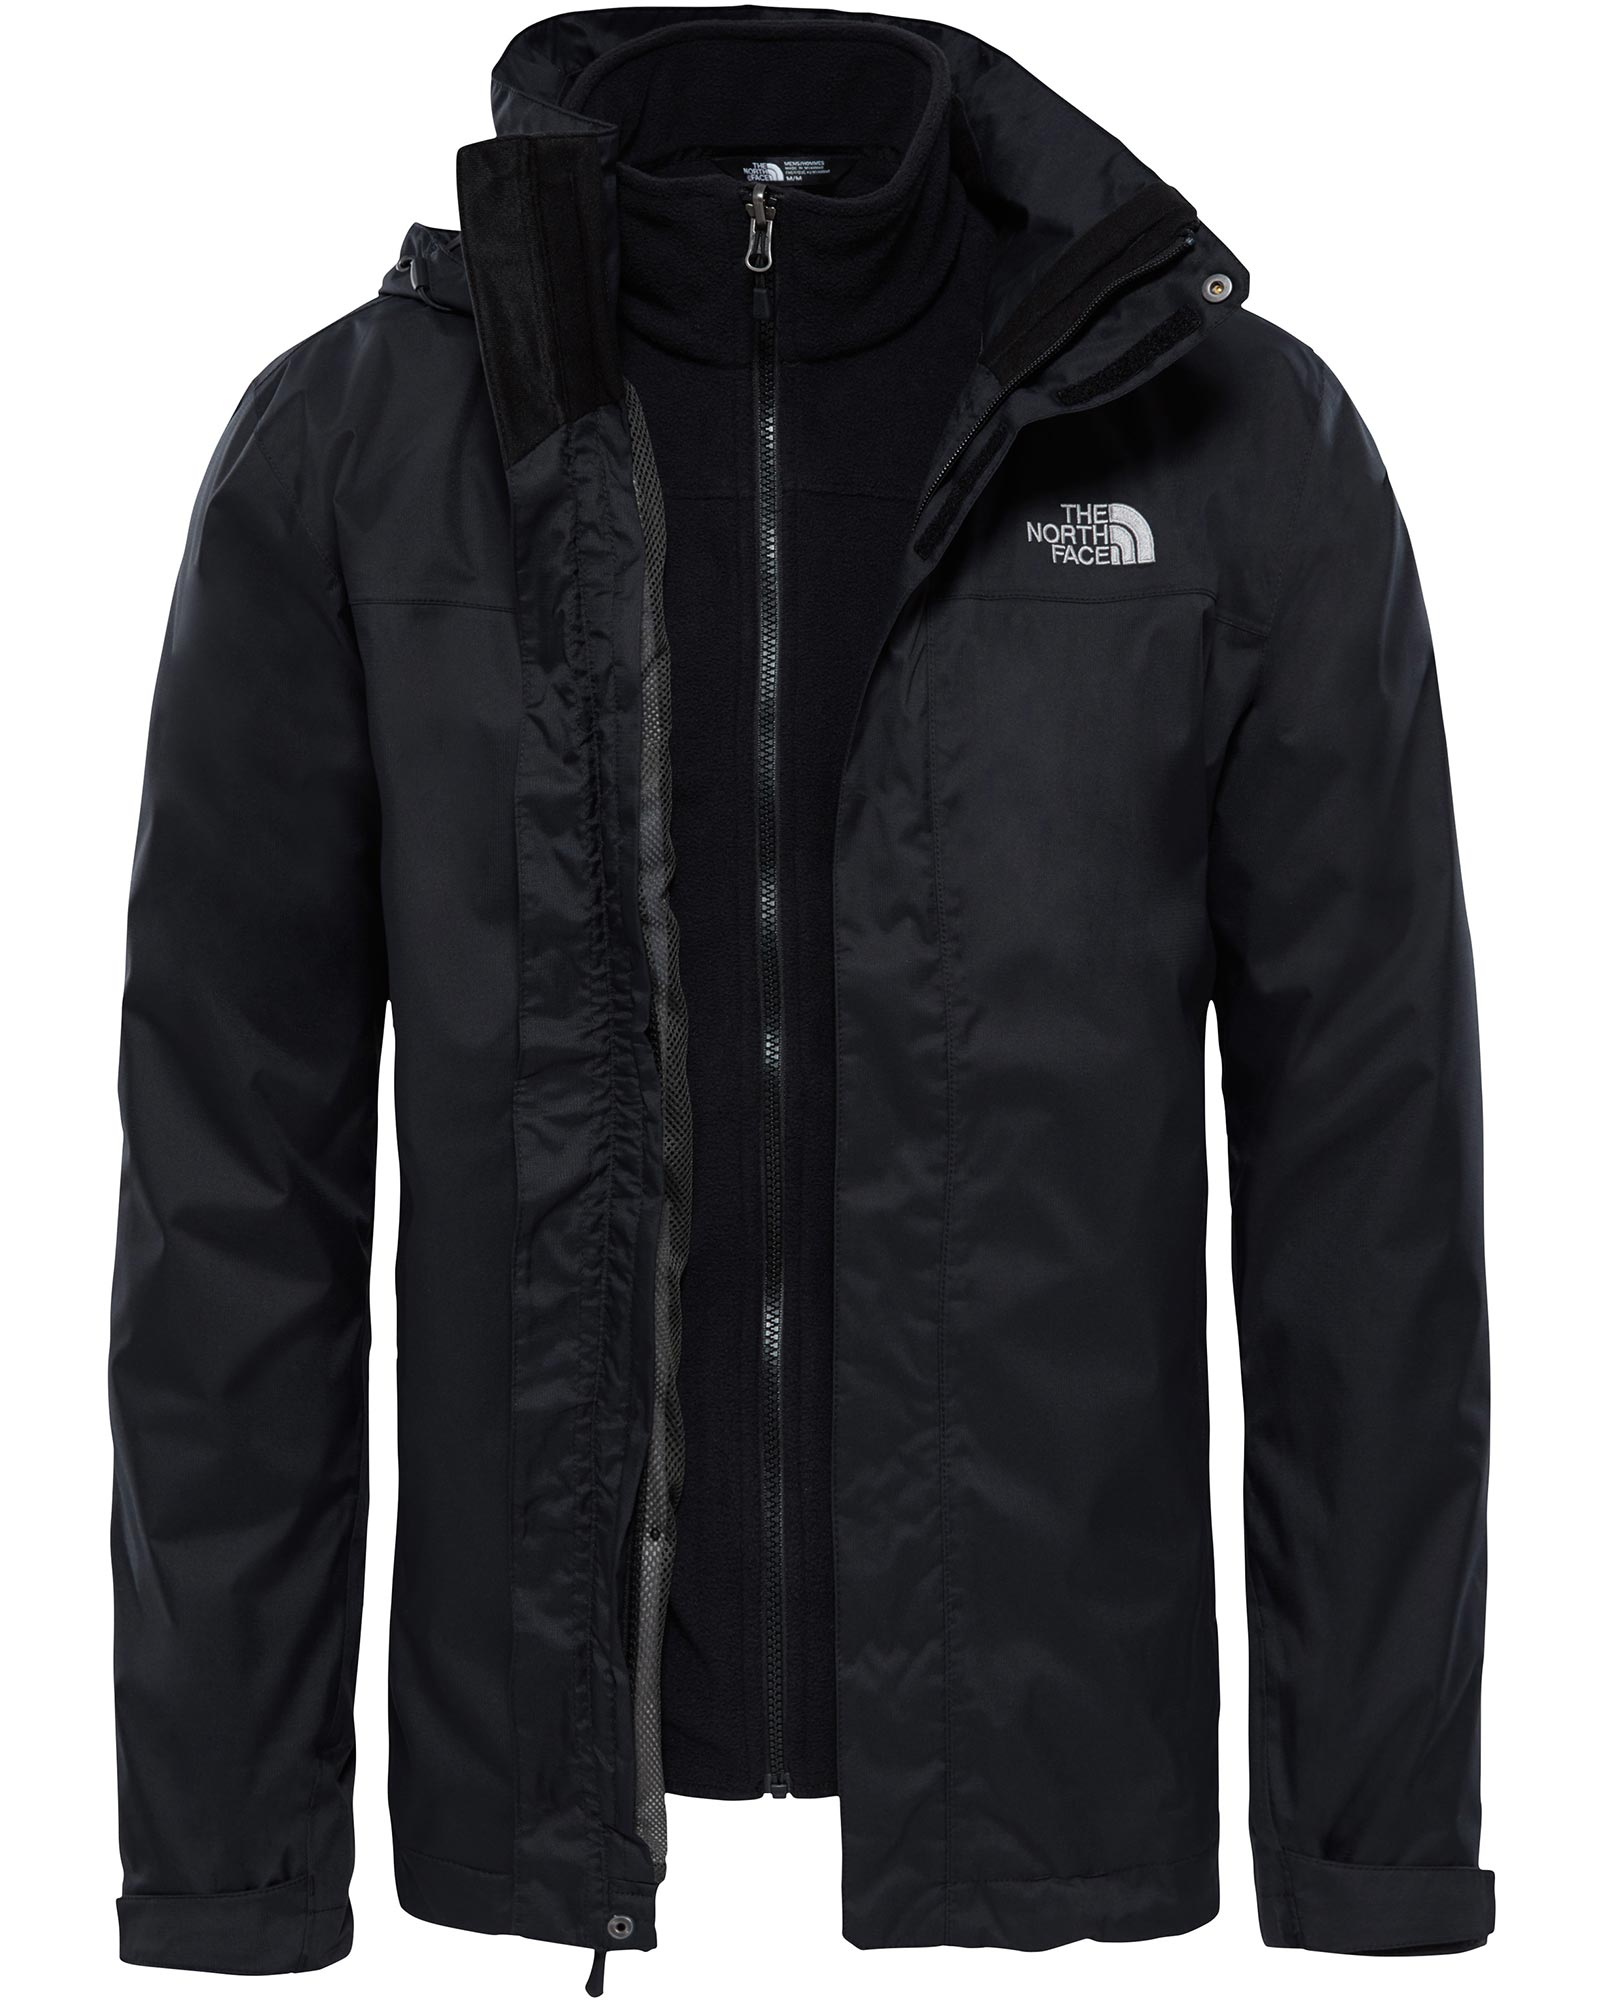 The North Face Evolve Triclimate Men’s Jacket - TNF Black S